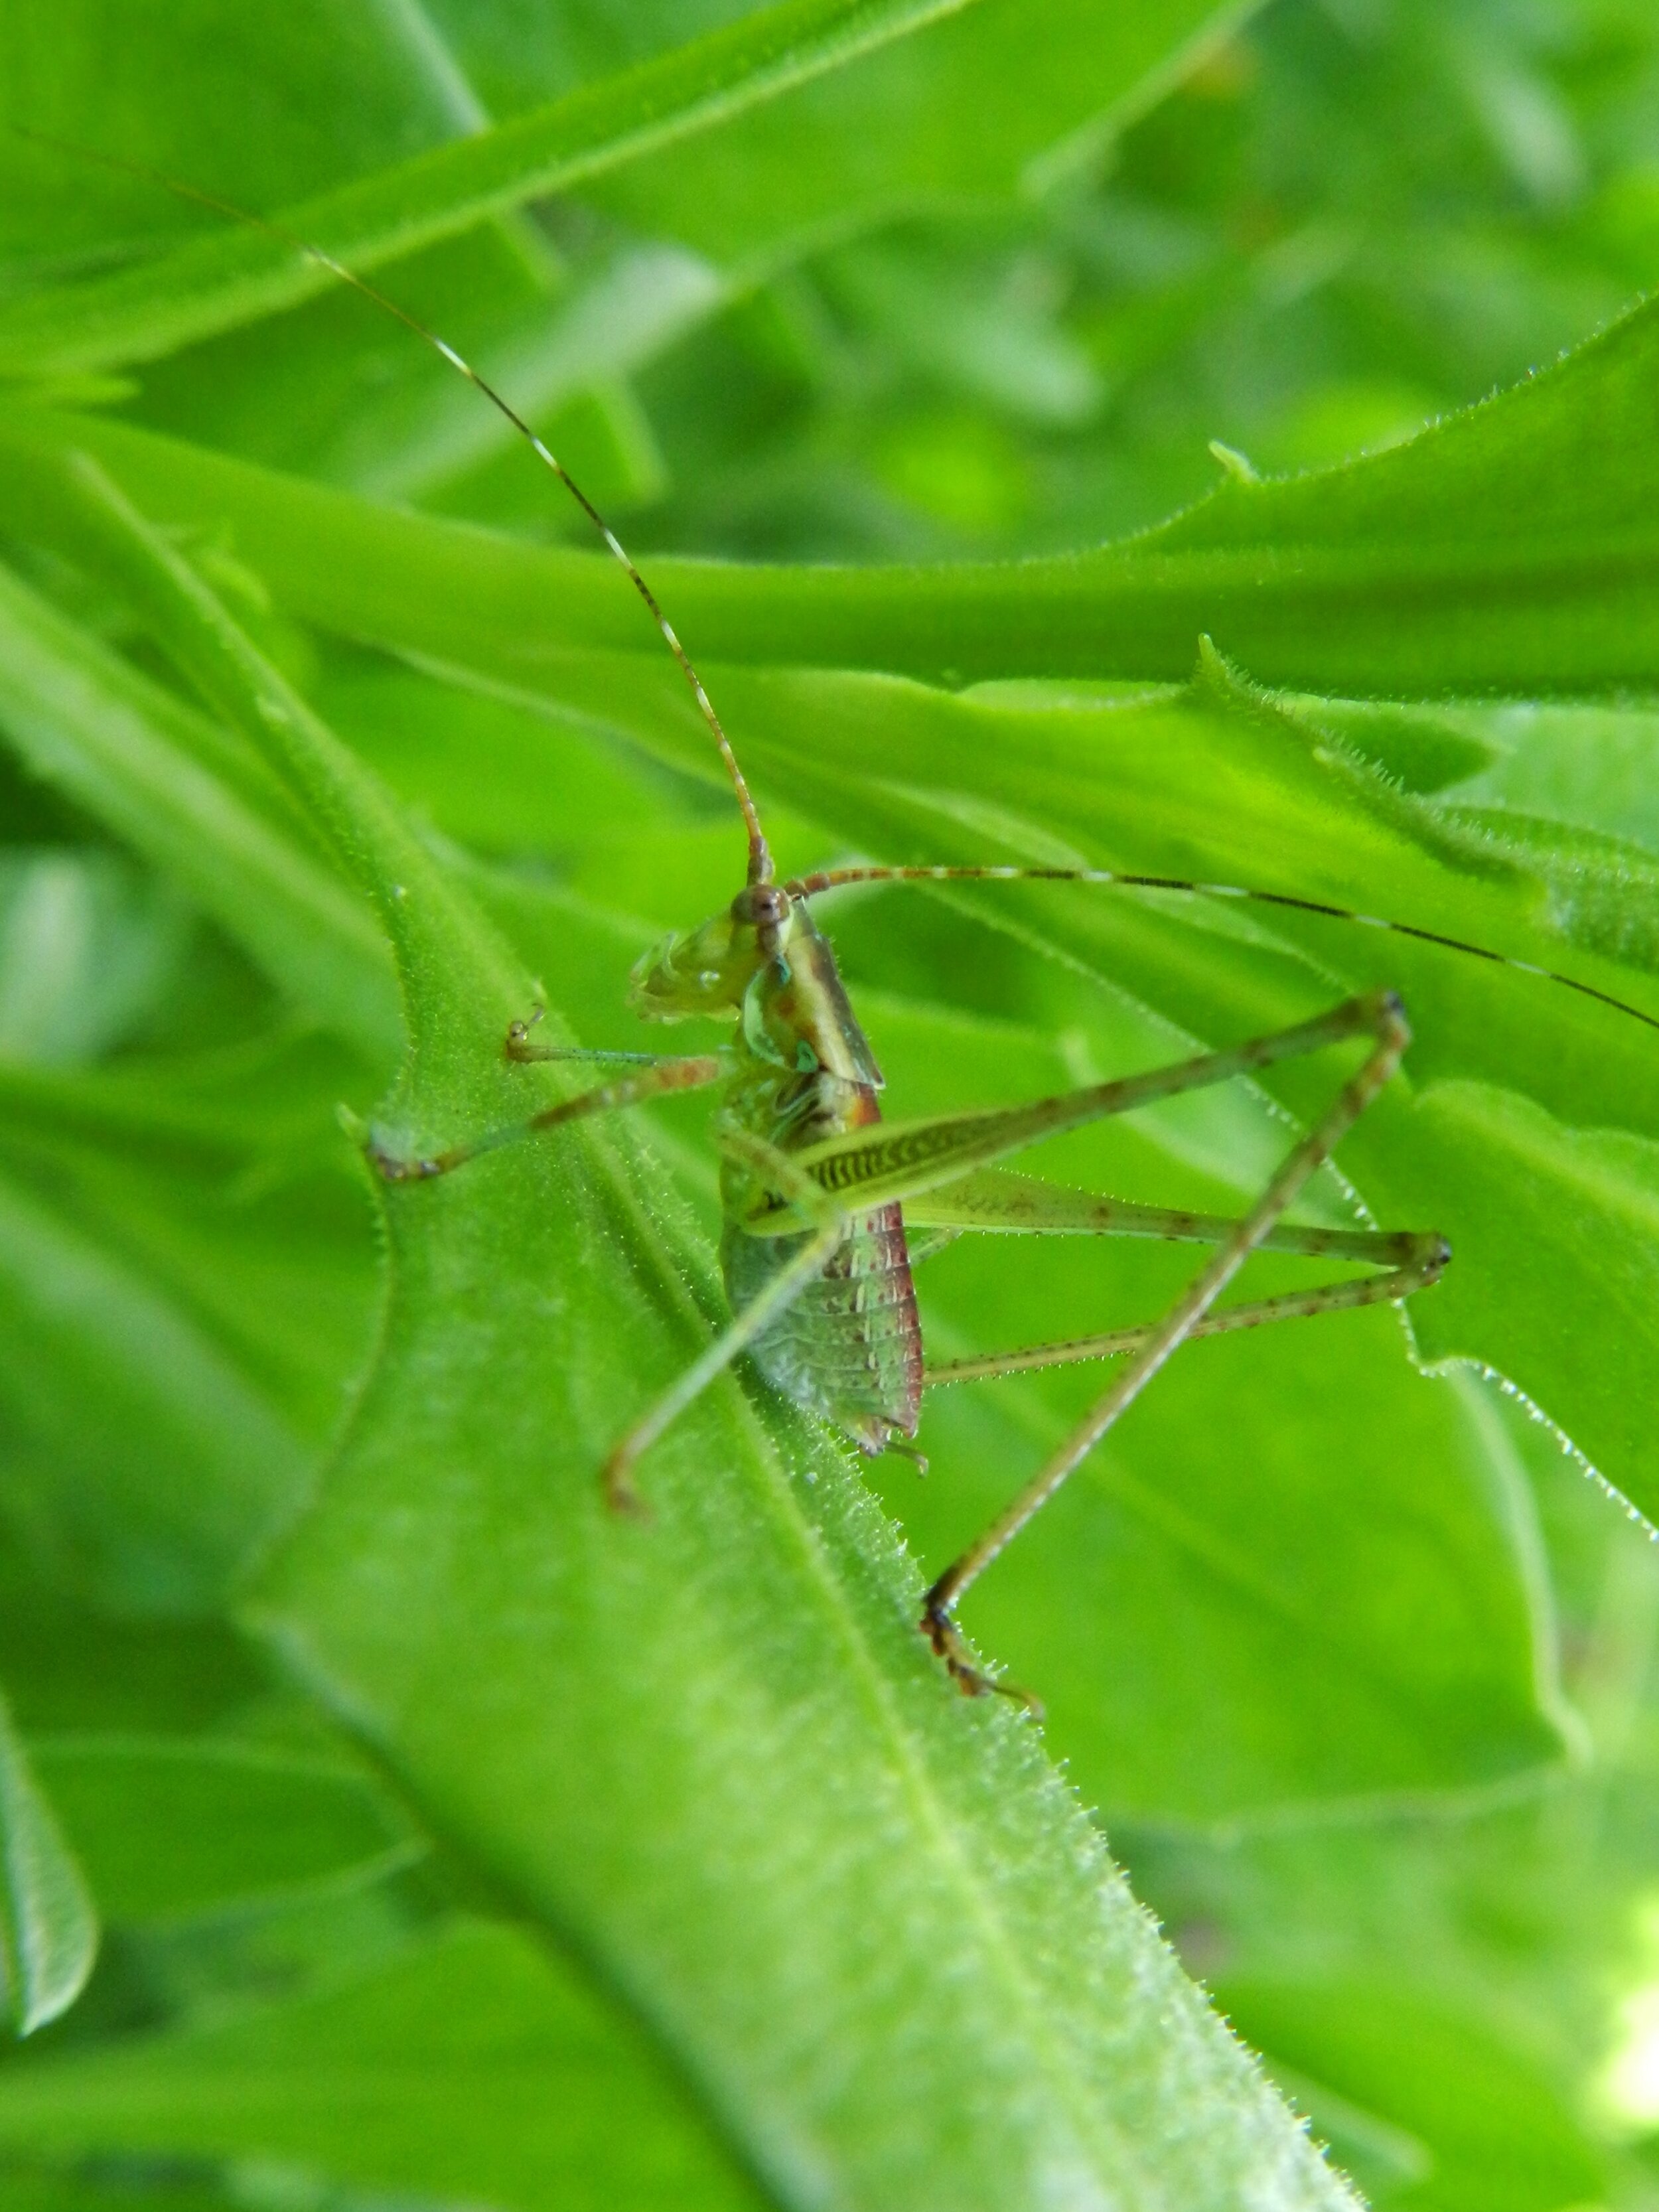  The region of the leg that connects grasshopper, cricket, and katydid legs to their bodies is swollen in appearance because of the huge muscles contained therein. With legs far longer than their bodies, they can rocket themselves a distance of more 